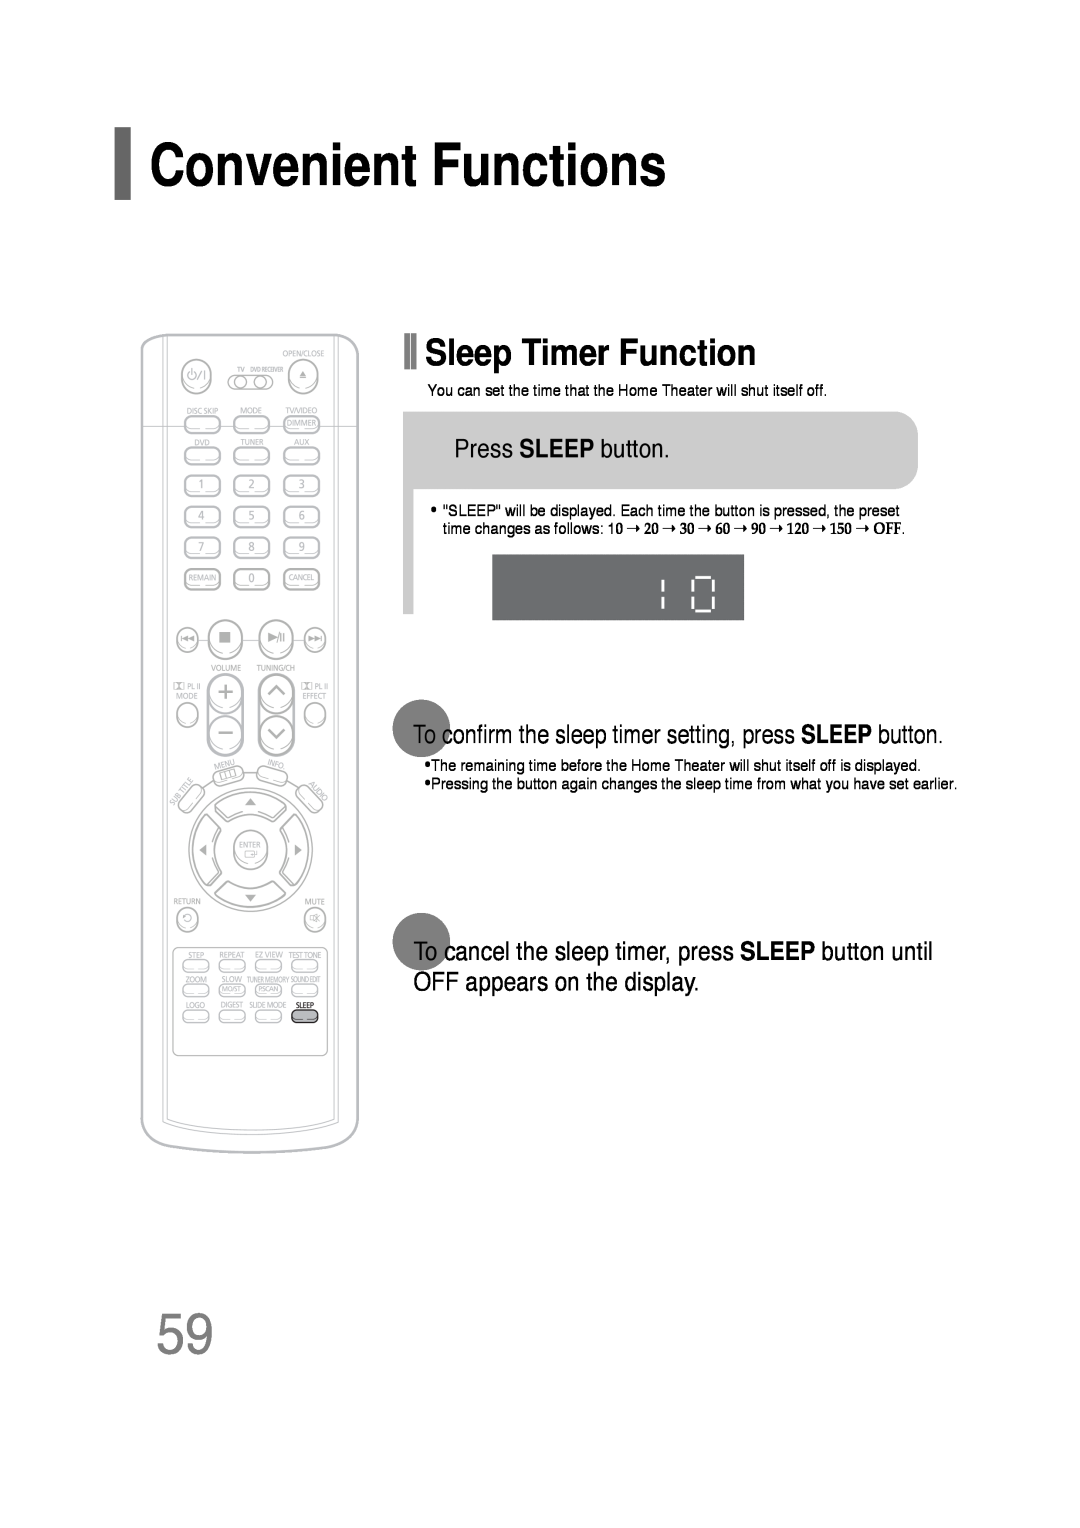 Samsung AH68-01701V manual Convenient Functions, Sleep Timer Function, Press SLEEP button, OFF appears on the display 